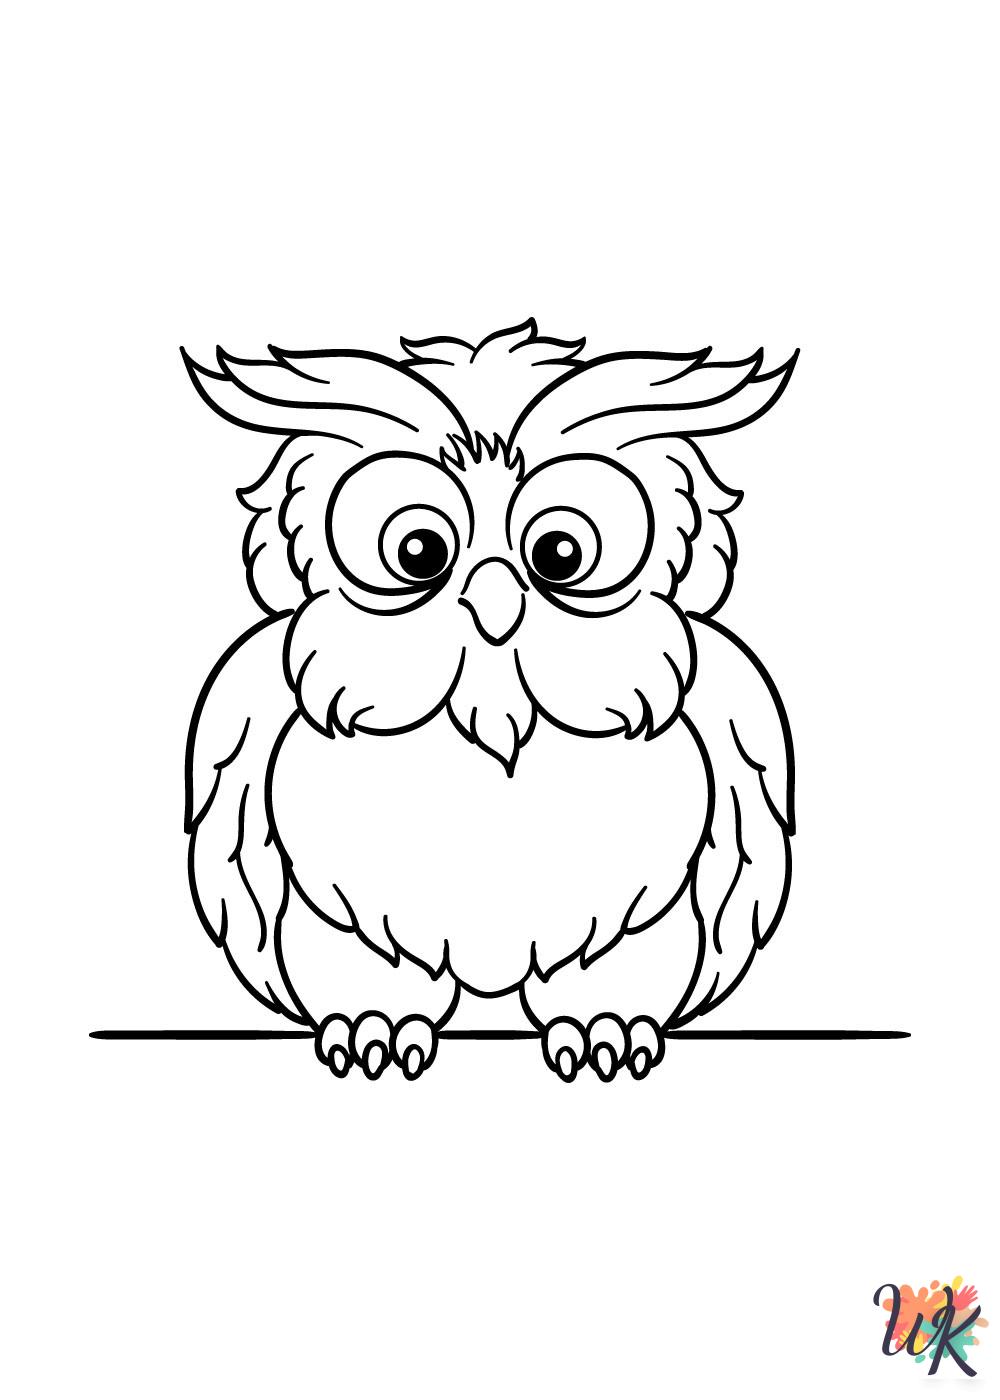 Owl coloring pages for adults pdf